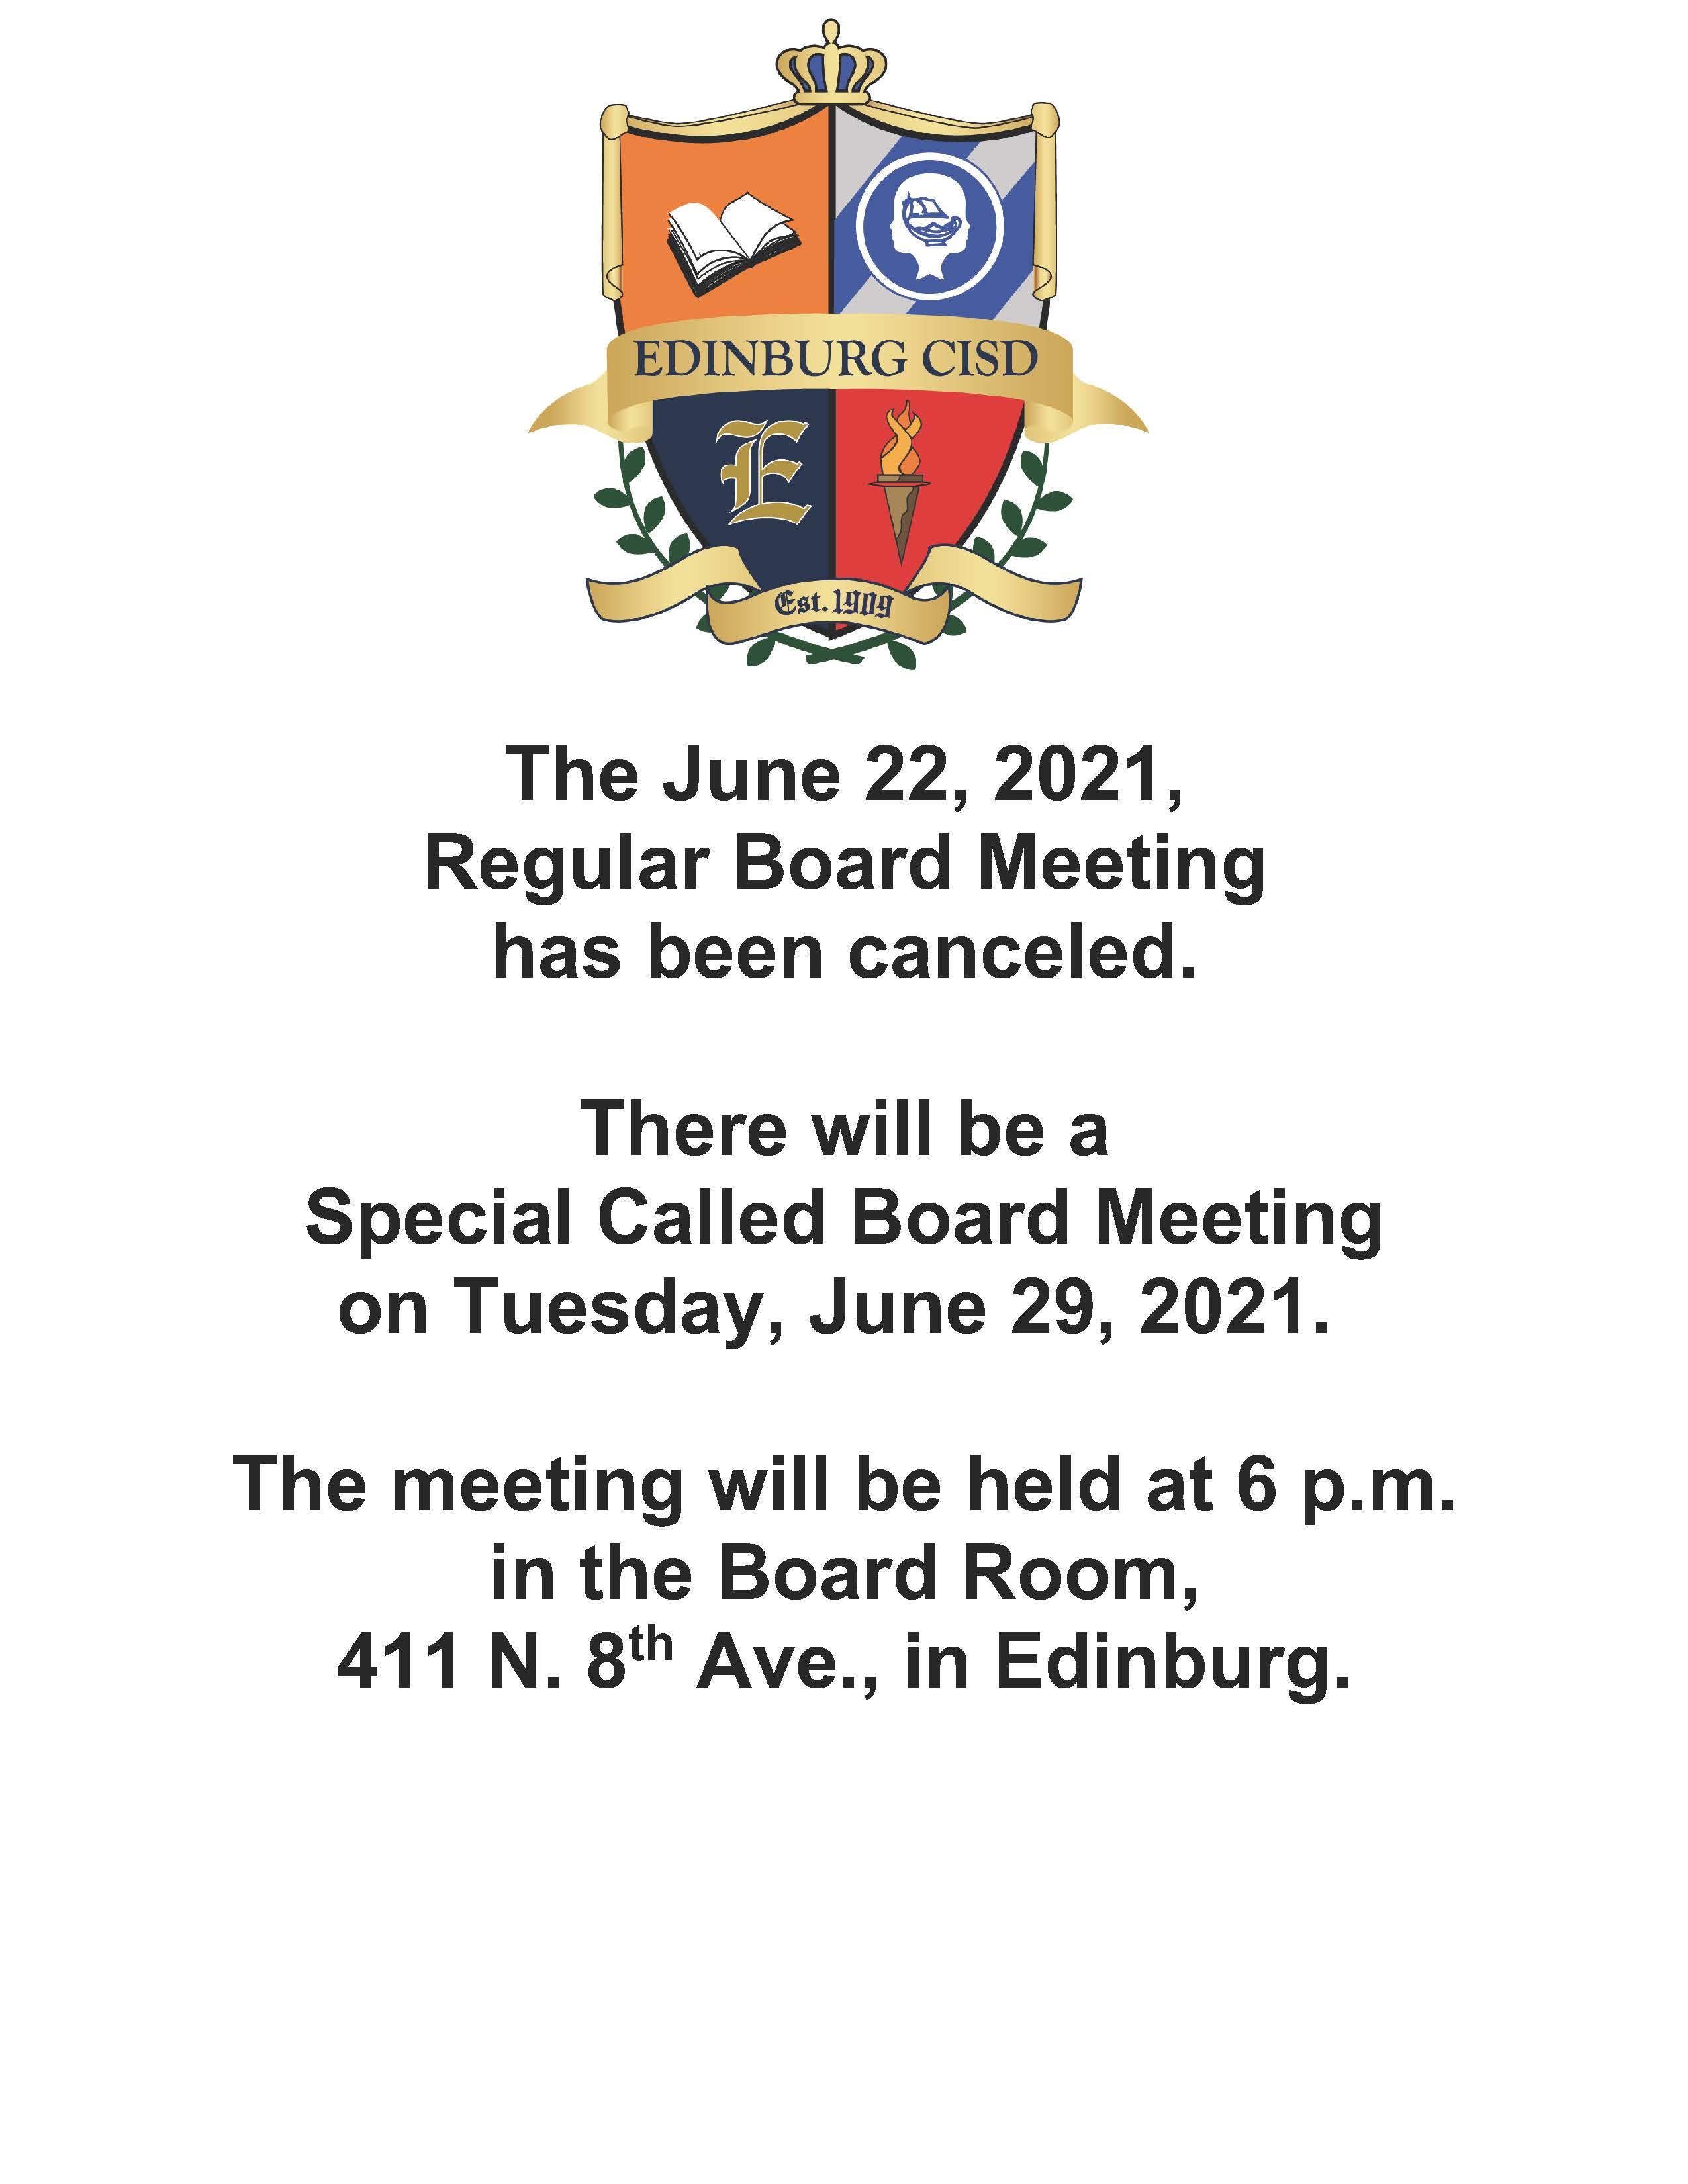 The June 22, 2021,  Regular Board Meeting has been canceled.  There will be a  Special Called Board Meeting on Tuesday, June 29, 2021.   The meeting will be held at 6 p.m. in the Board Room, 411 N. 8th Ave., in Edinburg.